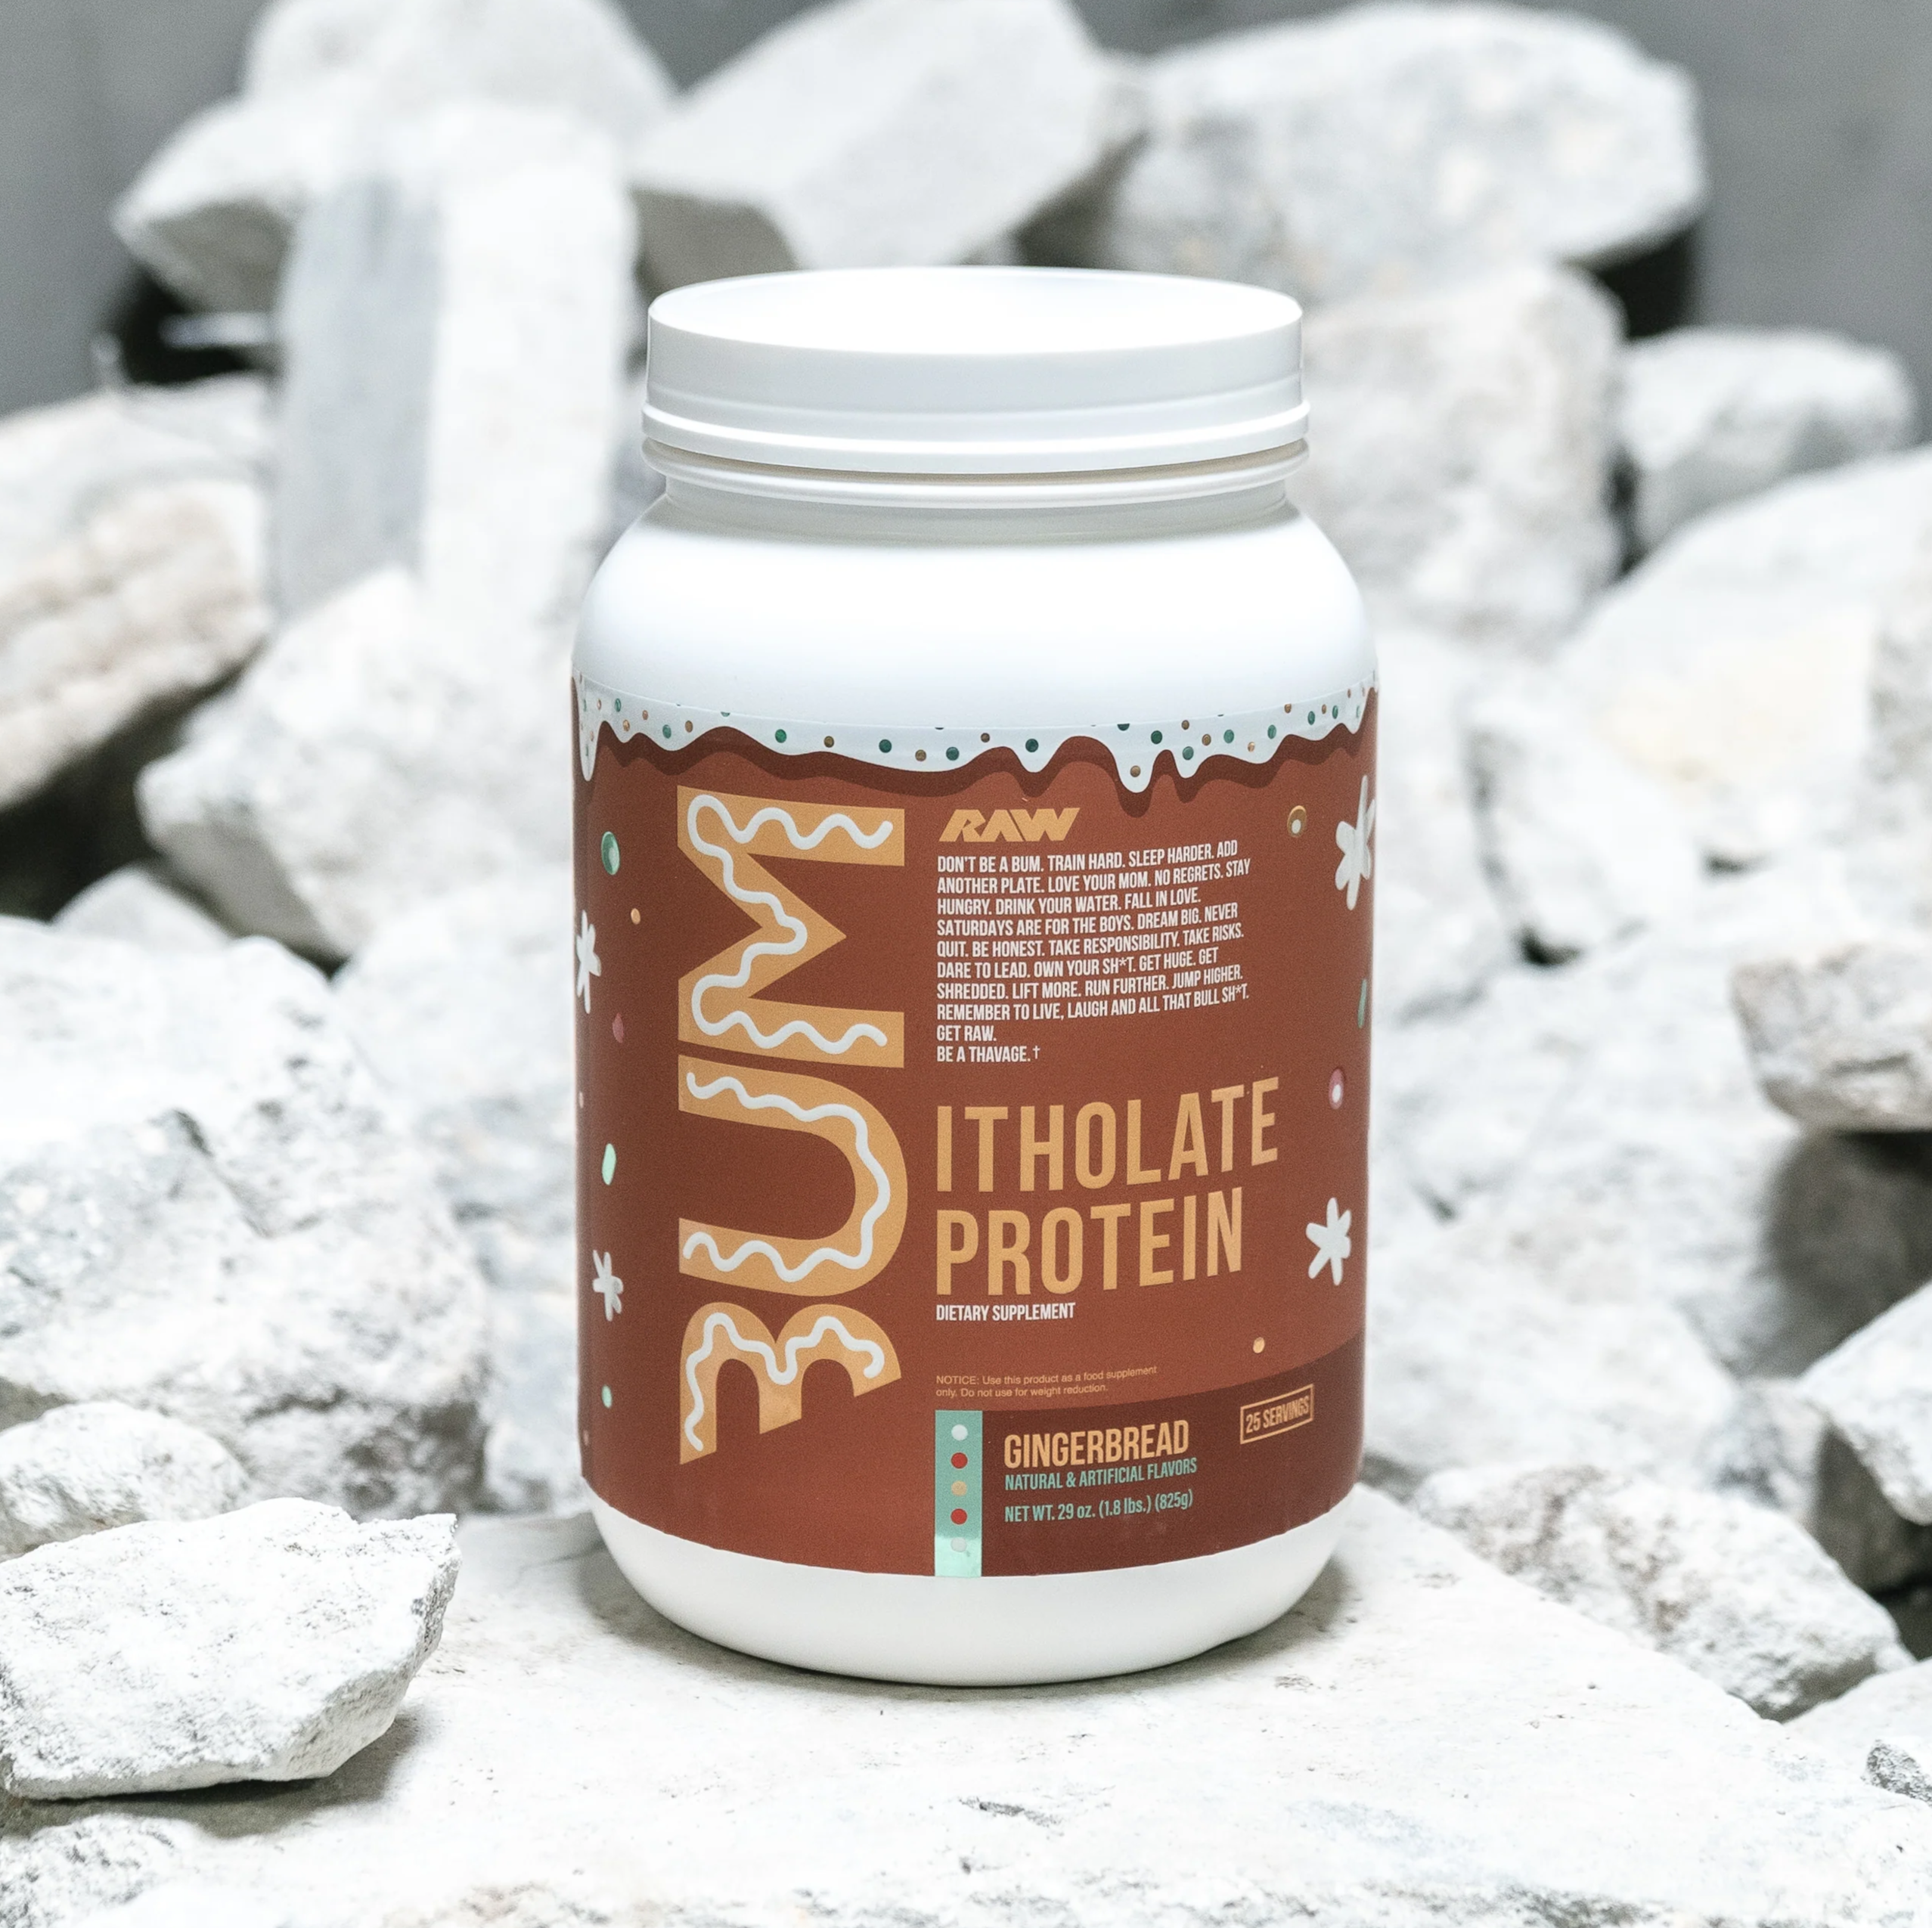 RAW Nutrition Gingerbread Itholate Protein